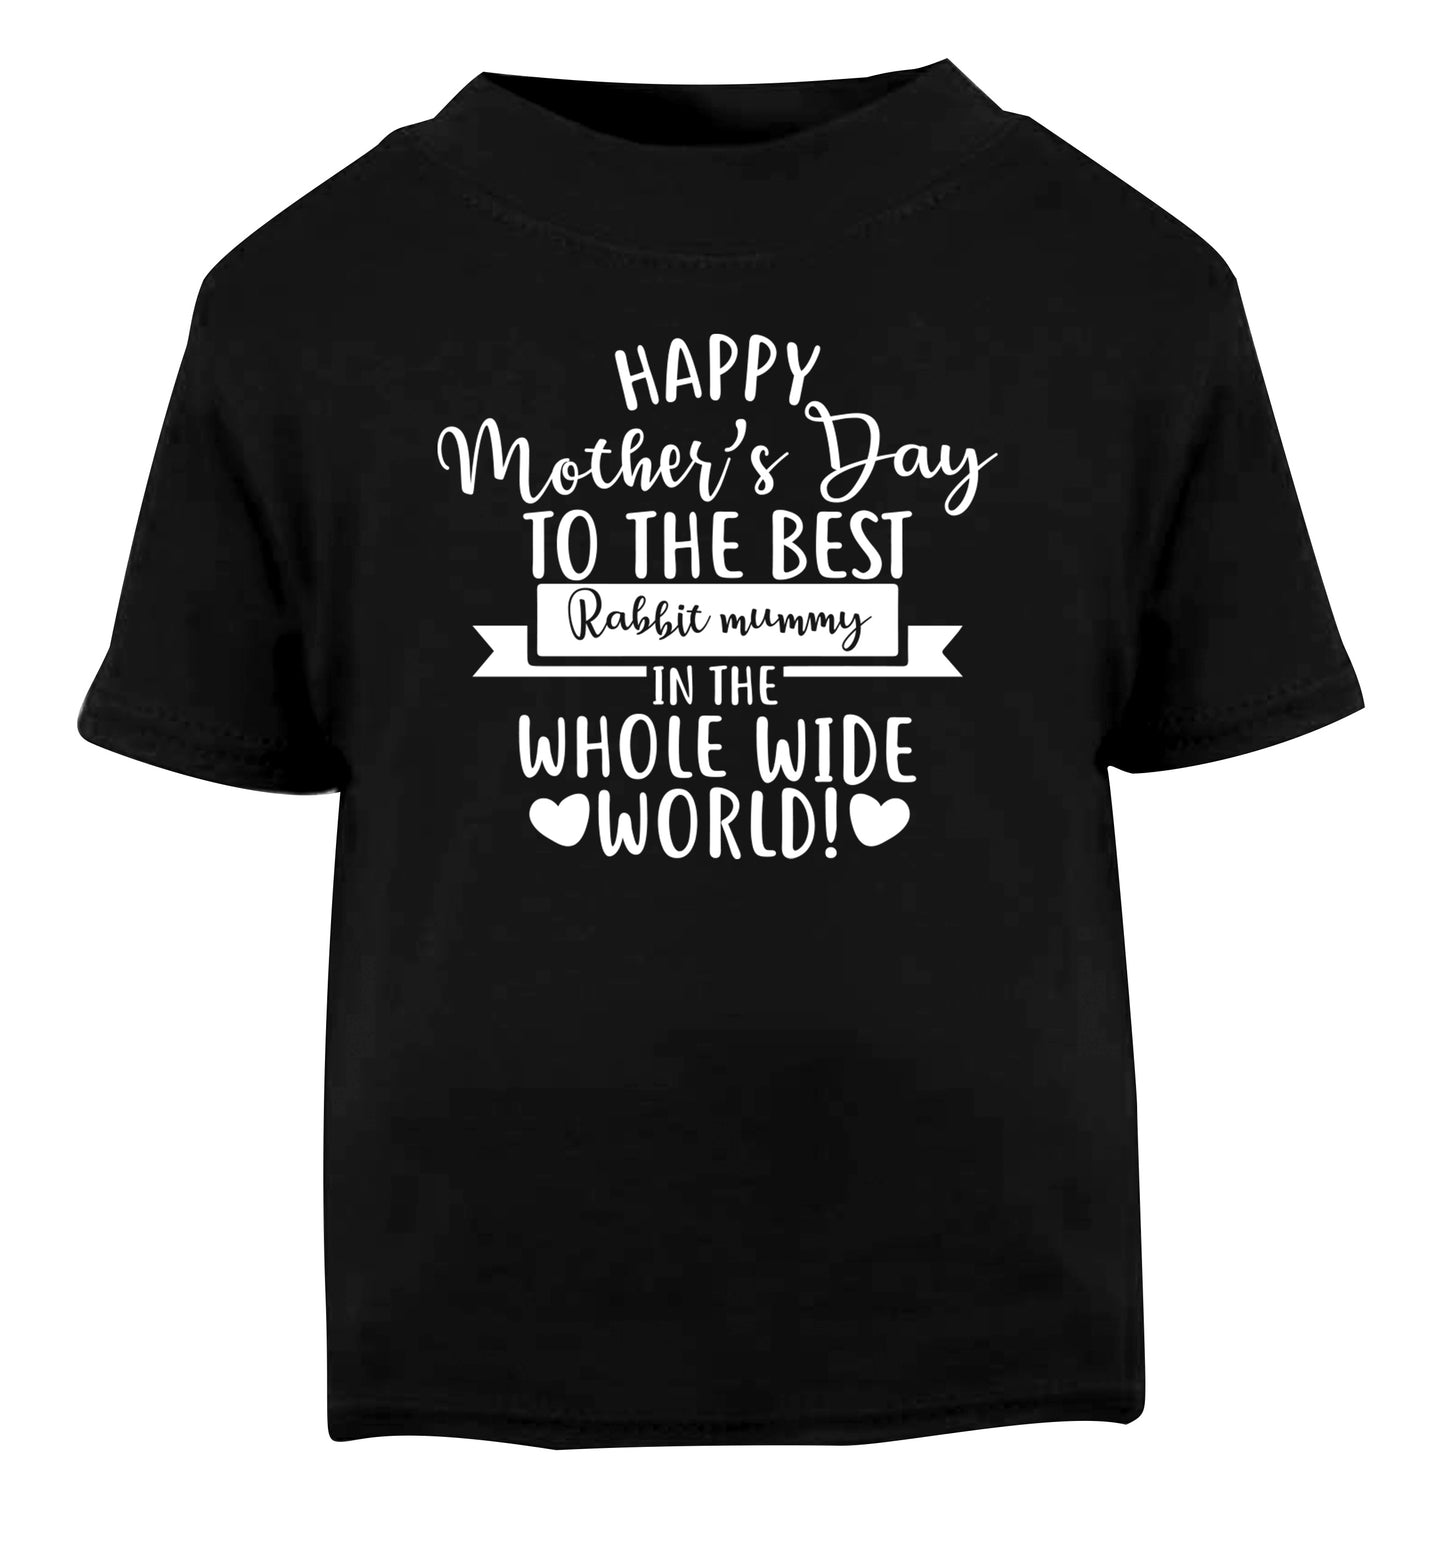 Happy mother's day to the best rabbit mummy in the world Black Baby Toddler Tshirt 2 years